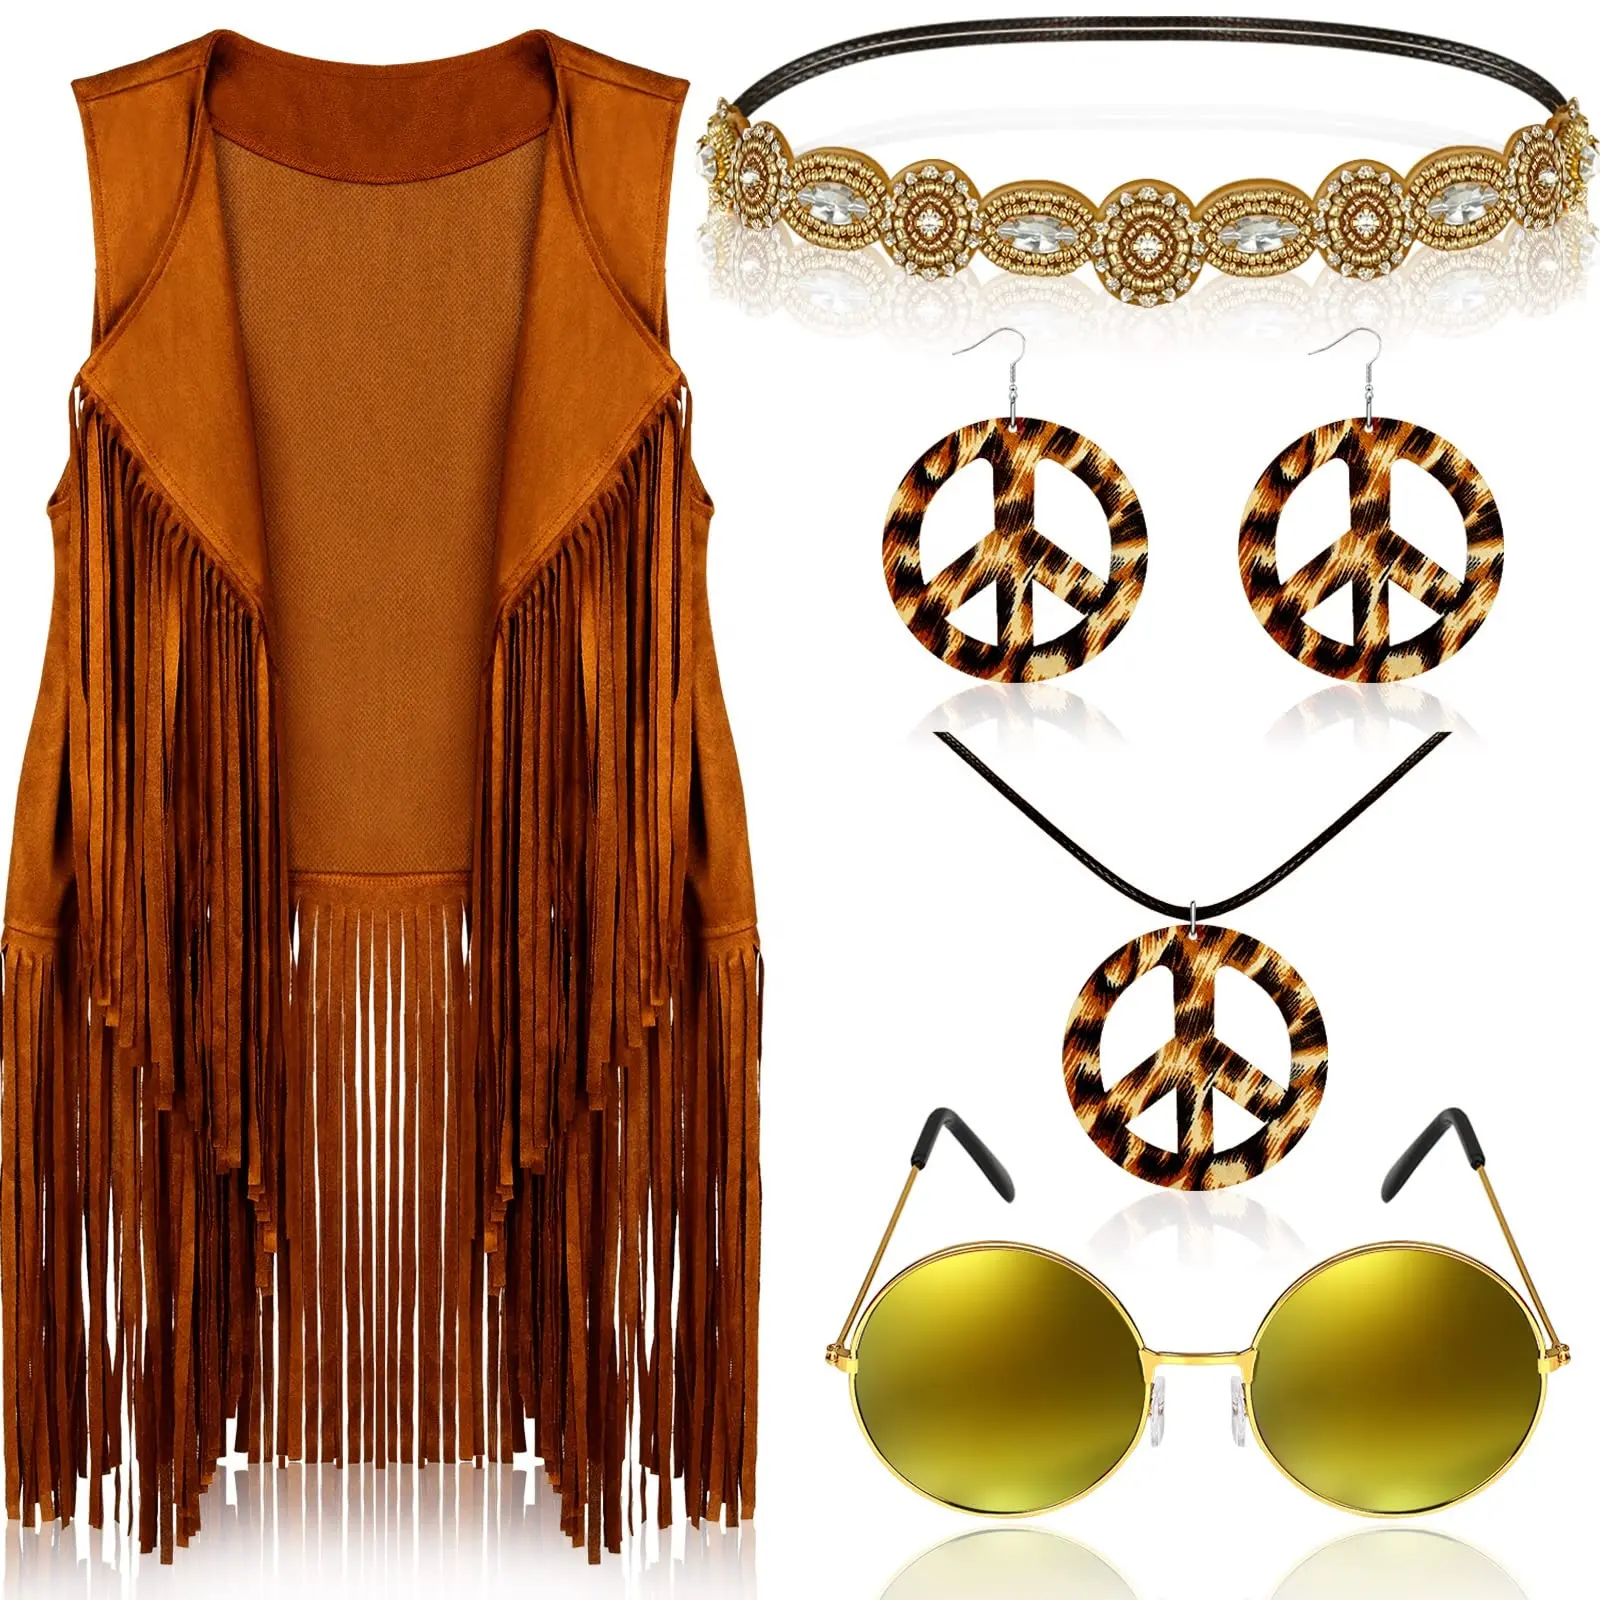 Khaki Hippie Costume For Women With Accessories OEM/ODM Wholesale and Distribution Only